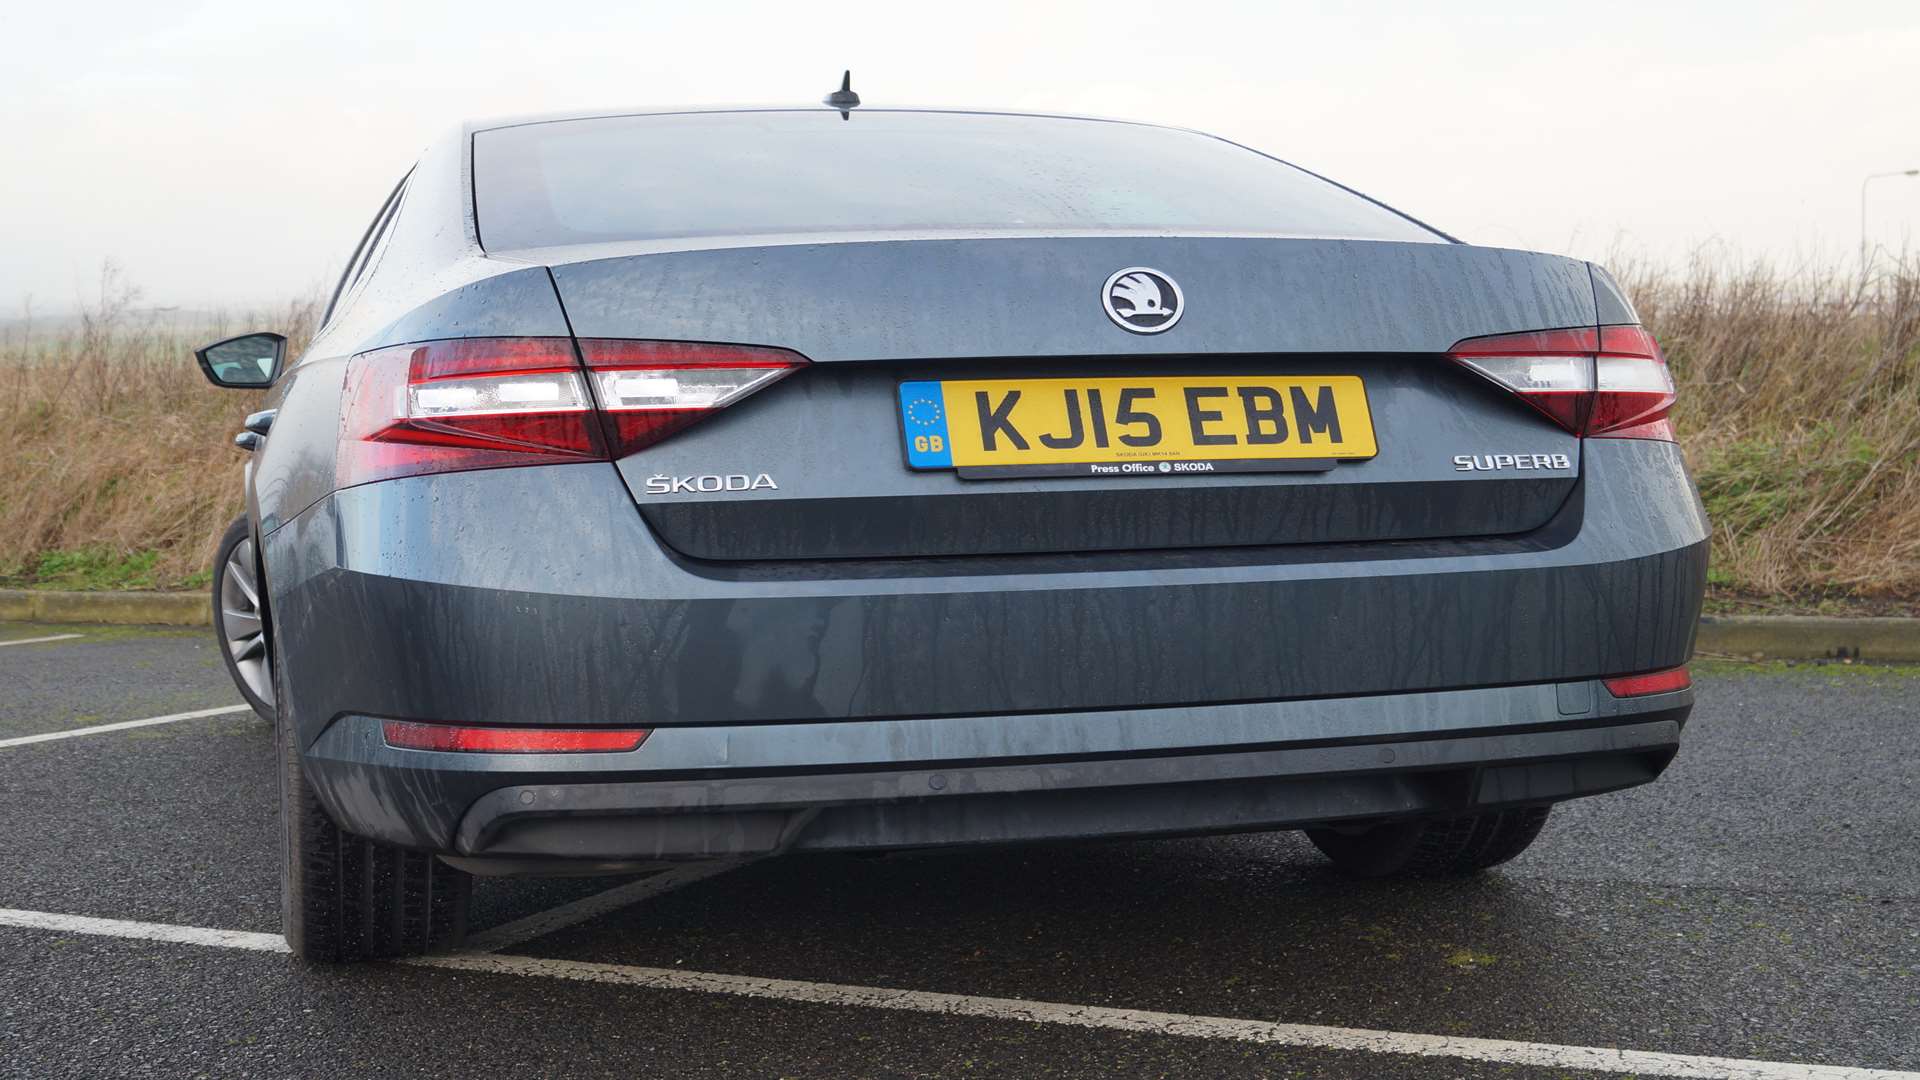 The twin-door boot lid, which compromised the styling, has been replaced with a traditional set-up